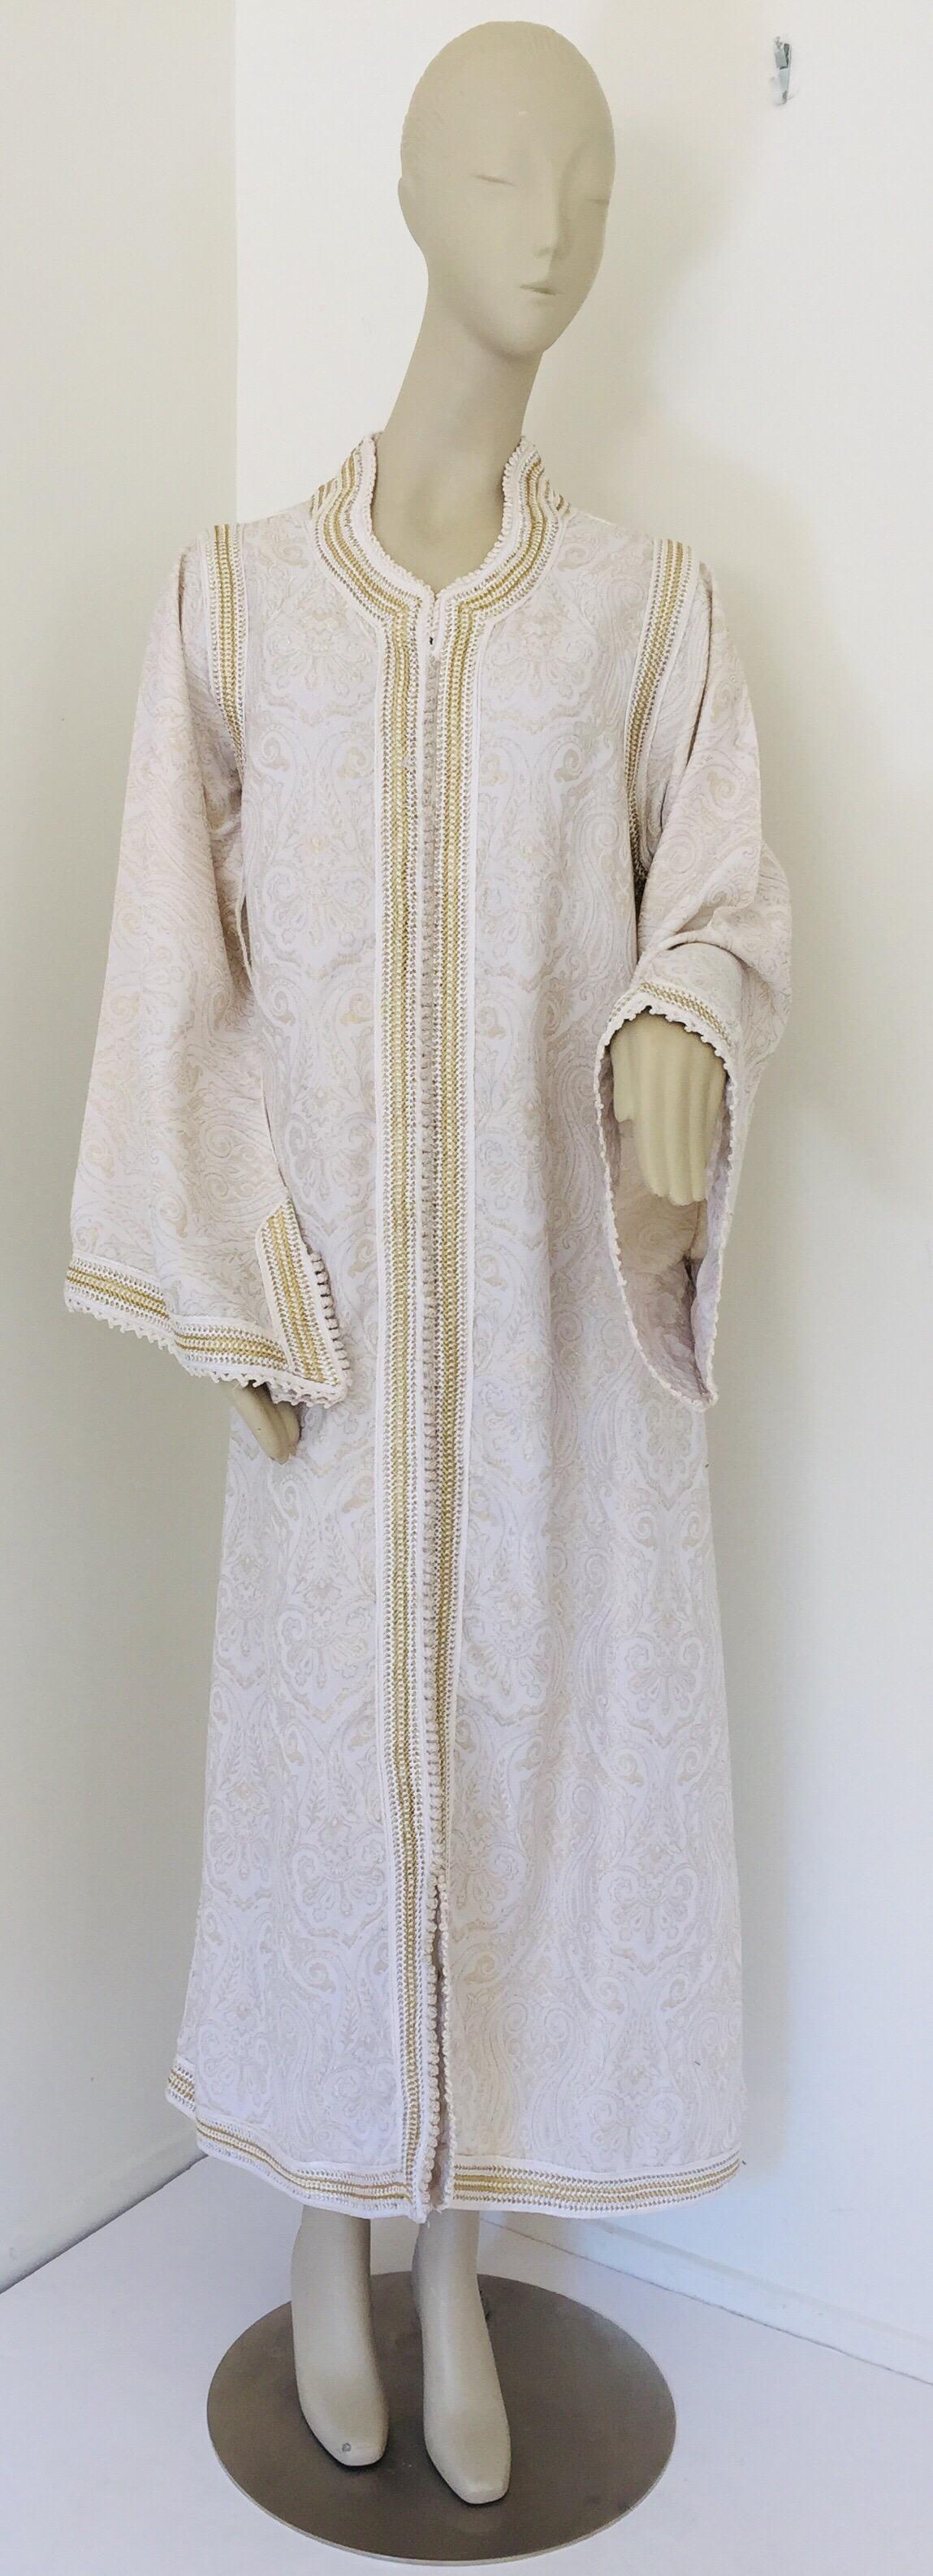 Elegant Moroccan caftan white floral embroidered with gold trim.
This long maxi dress kaftan trim is embroidered and embellished entirely by hand.
One of a kind evening Moroccan Middle Eastern gown.
The kaftan features a traditional neckline and